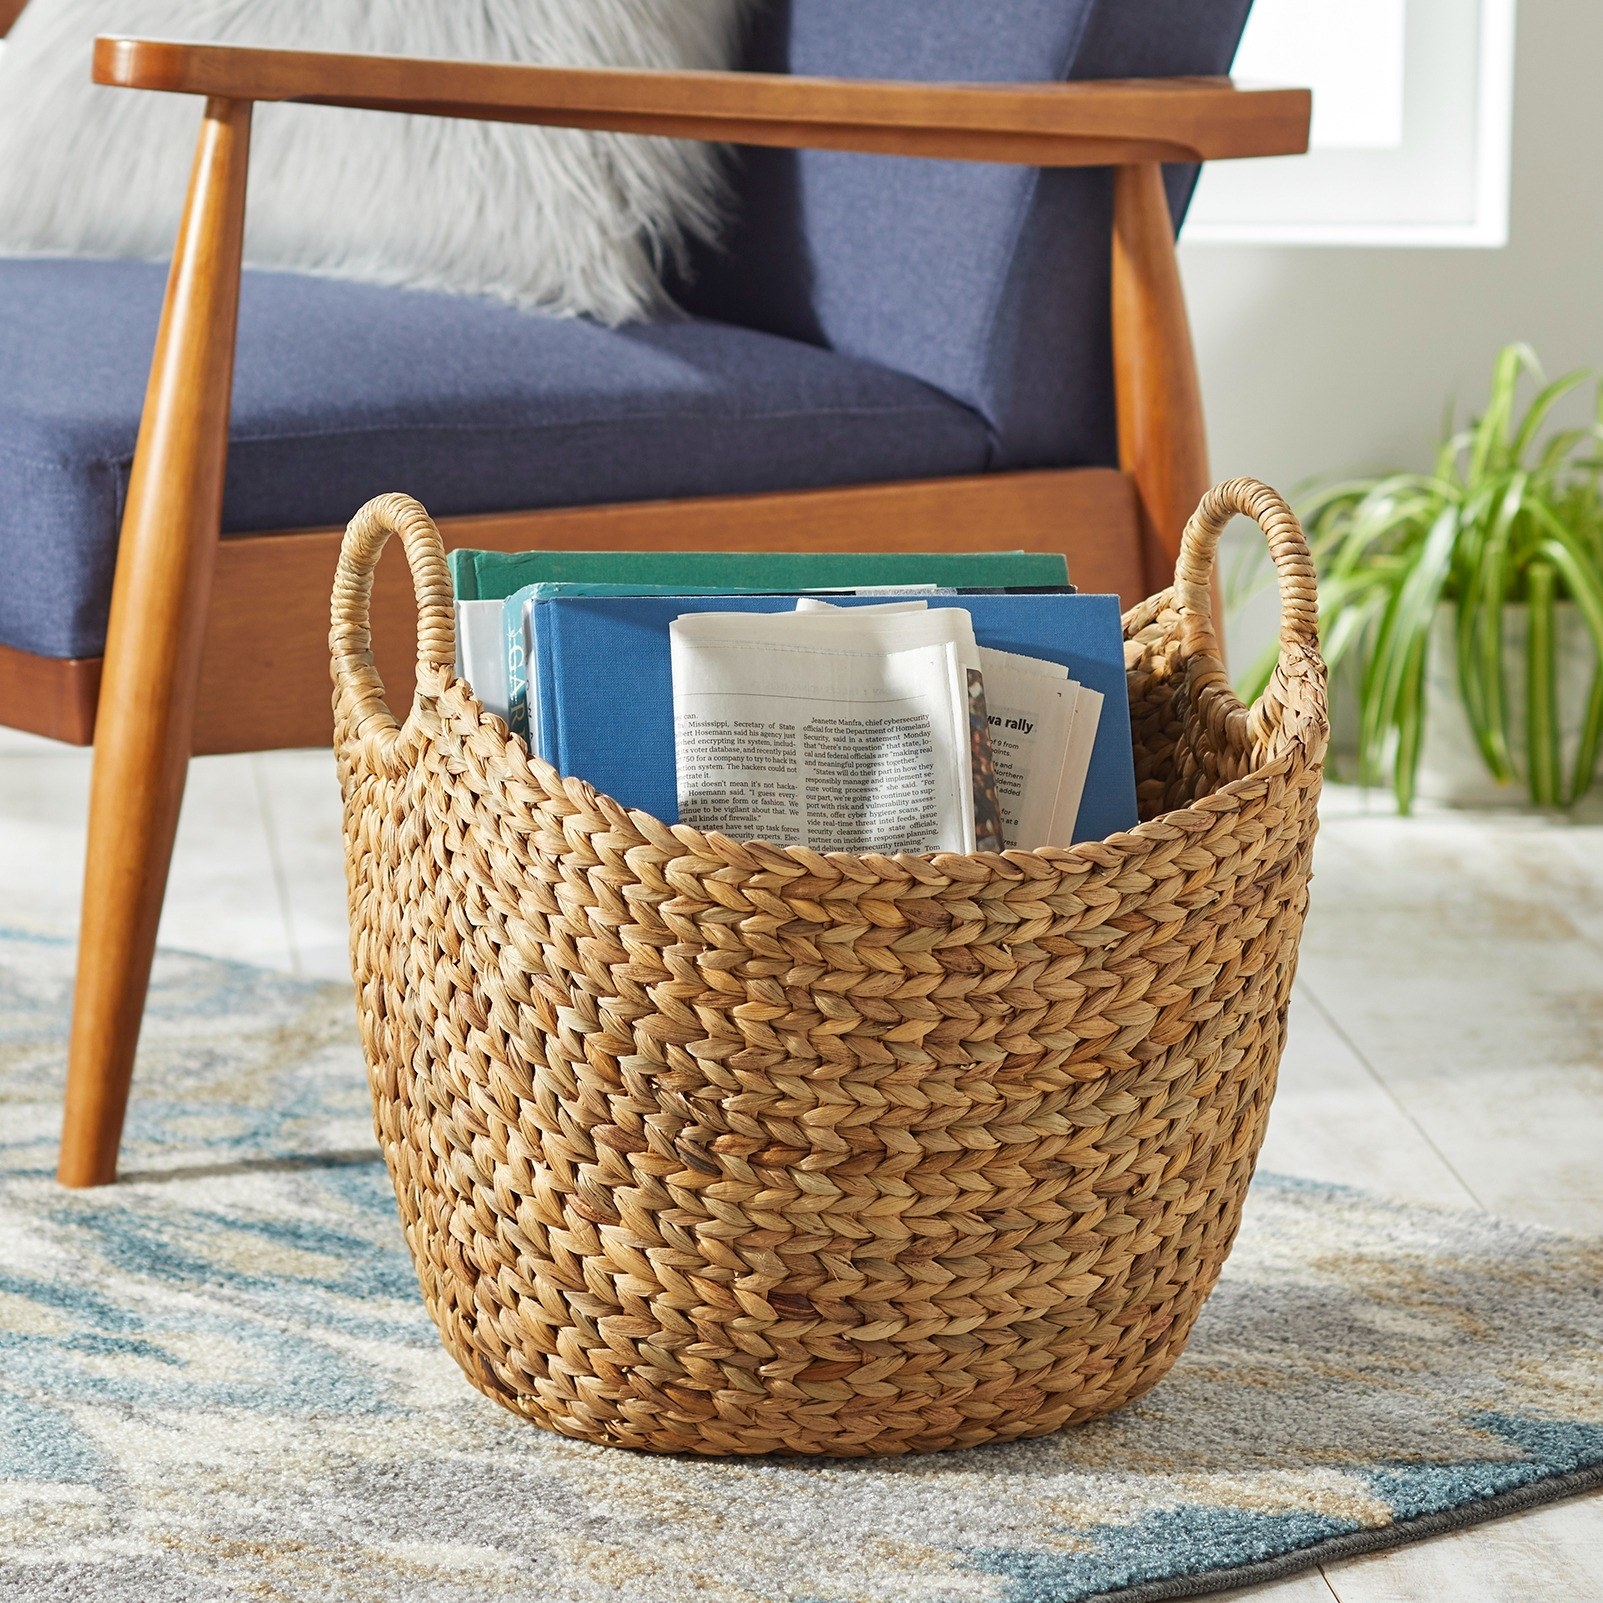 the basket with books and newspapers in it